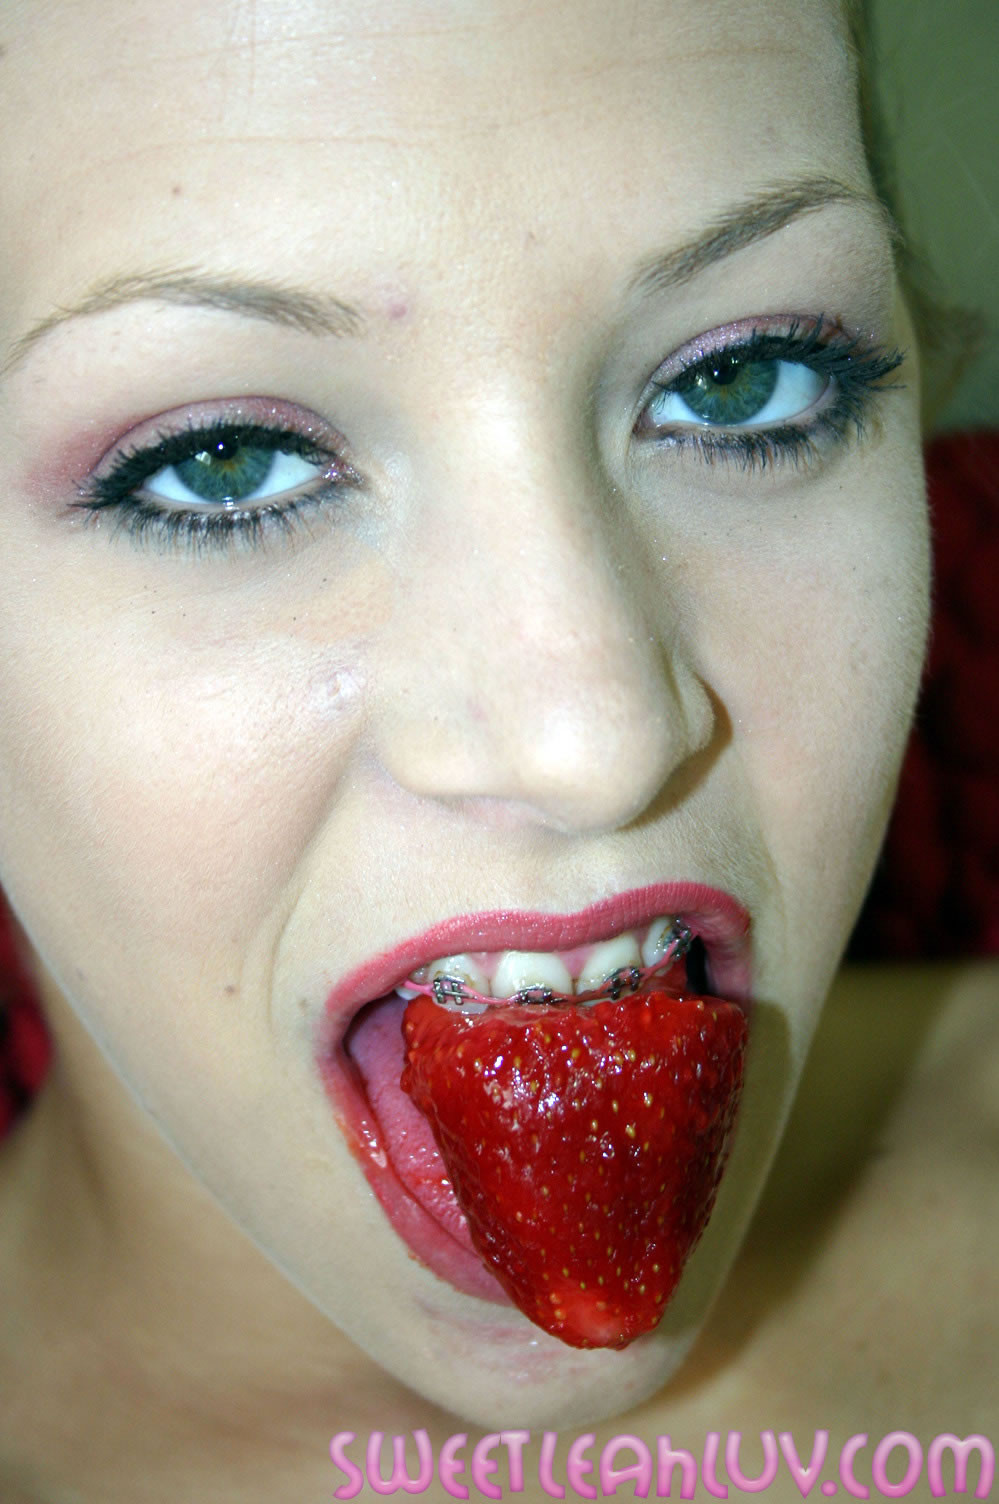 Petite blond Leah Luv gets nasty with strawberries #73544395